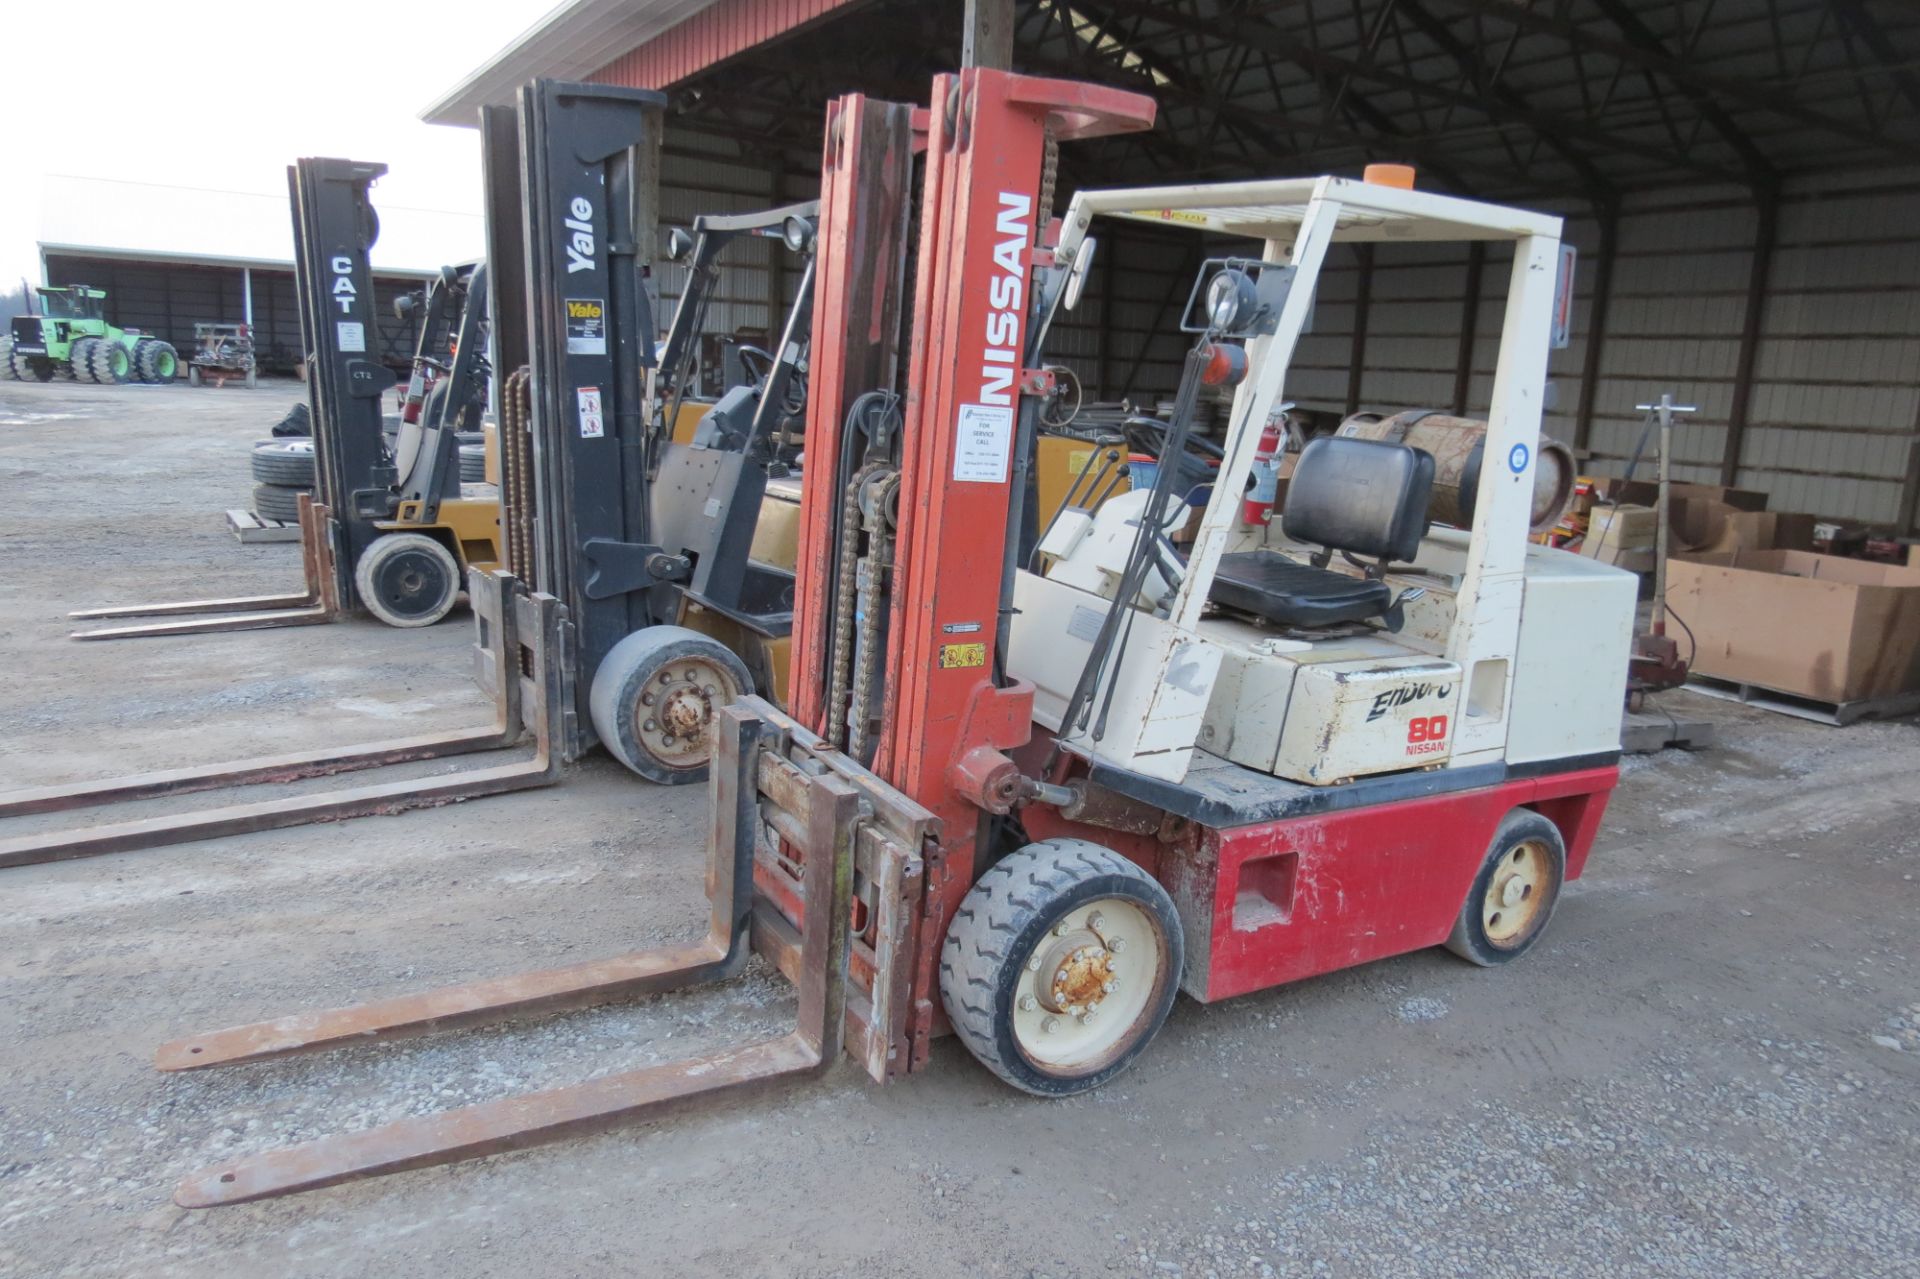 Nissan 80 forklift, 6950 lb cap, 3 stage mast, solid tire, LP, sideshift, 2 speed, sells with LP